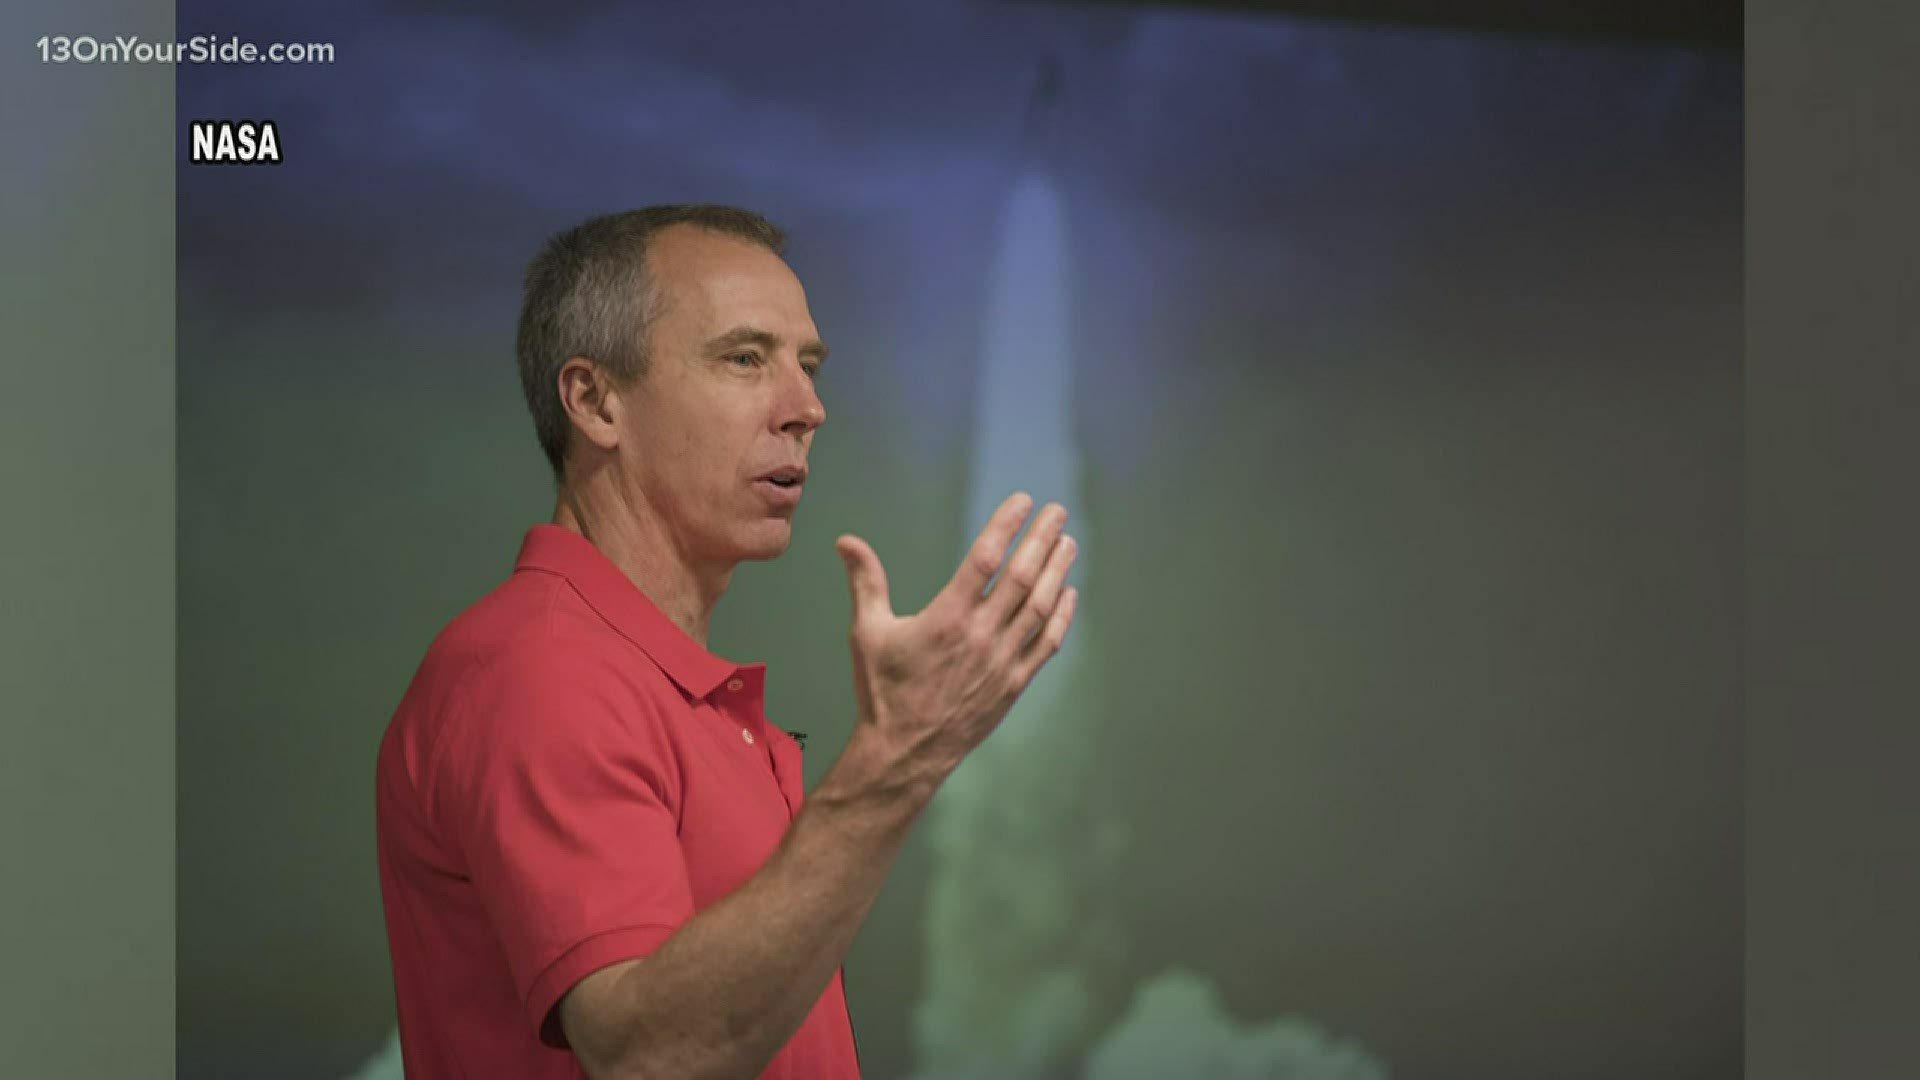 Drew Feustel says the skills he learned in space can be used while being forced to stay at home.